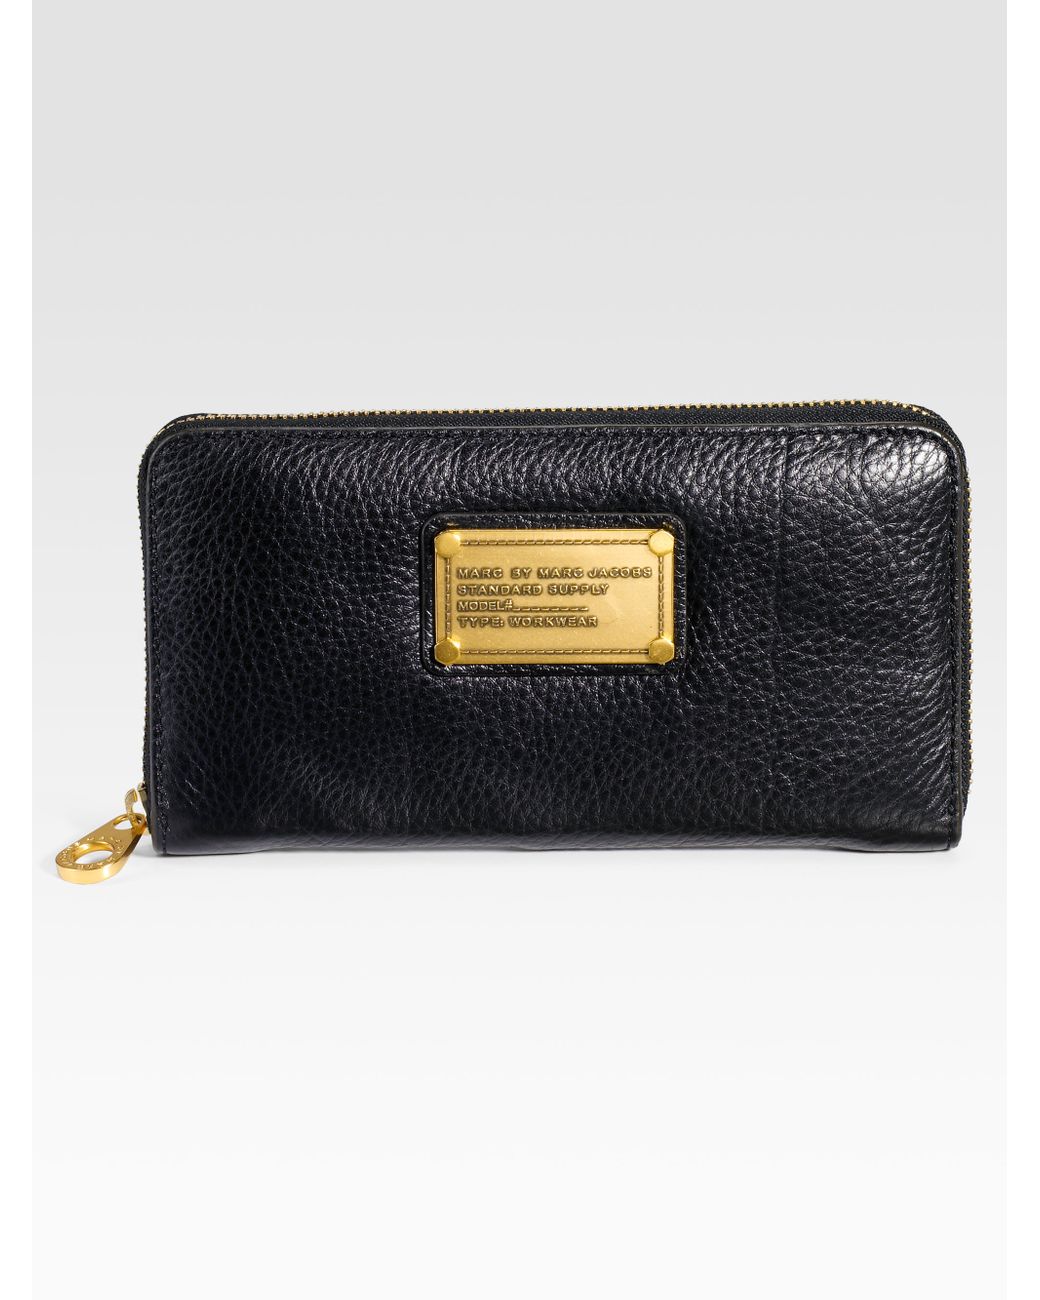 Marc By Marc Jacobs Classic Q Zip-around Wallet in Black | Lyst